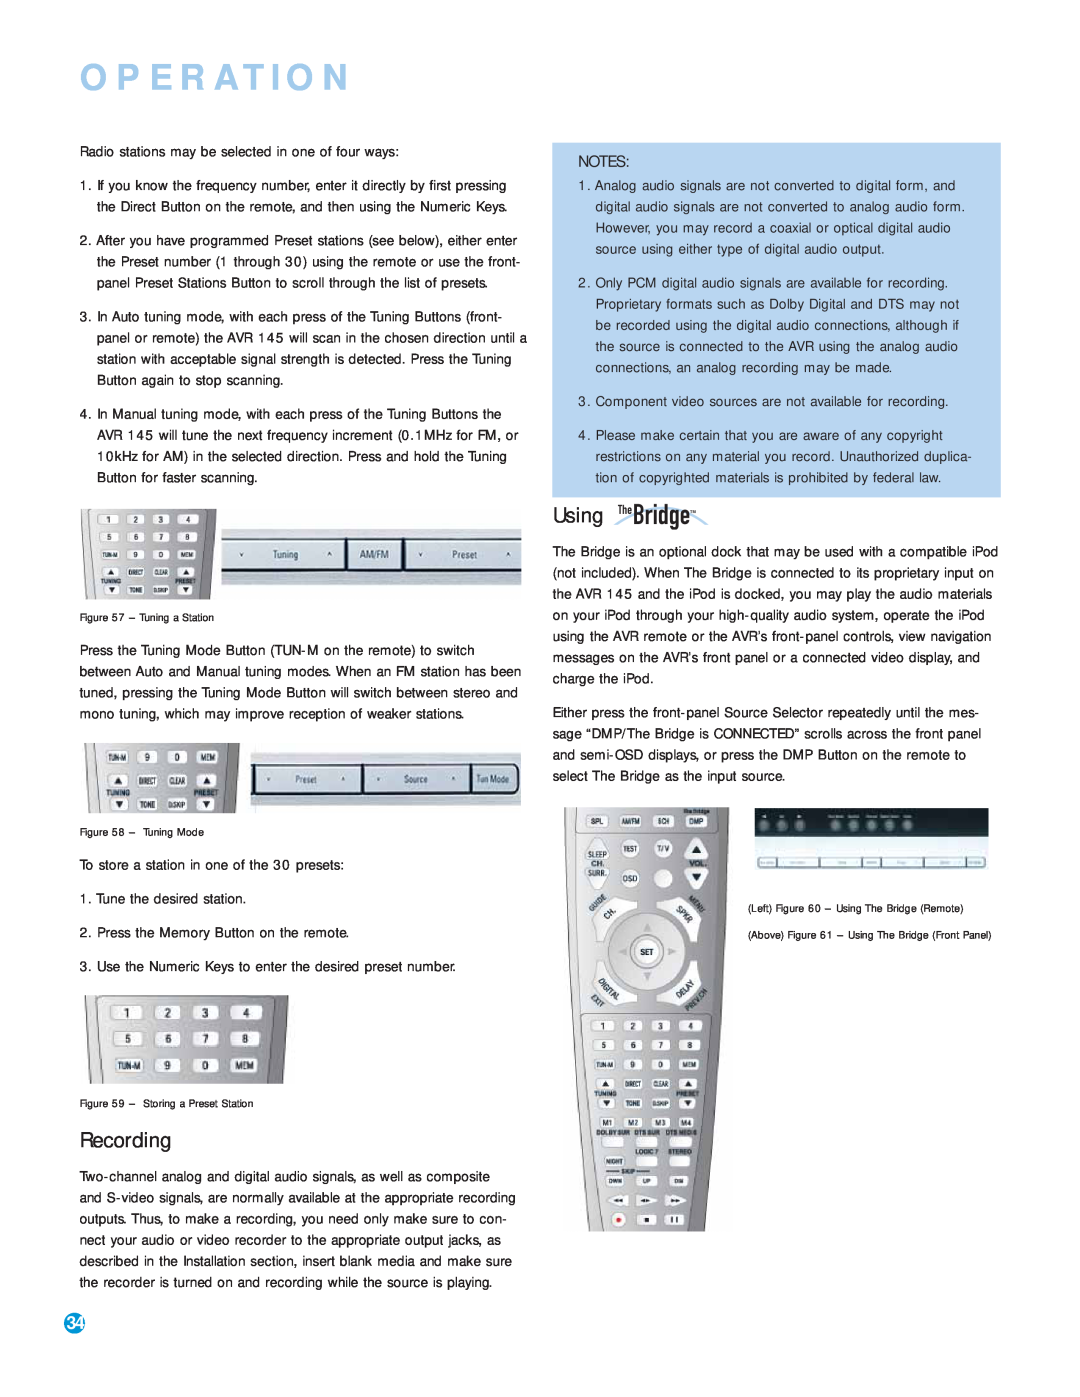 Harman-Kardon AVR 145 owner manual Recording, Using TheBridgeTM, Operation, To store a station in one of the 30 presets 